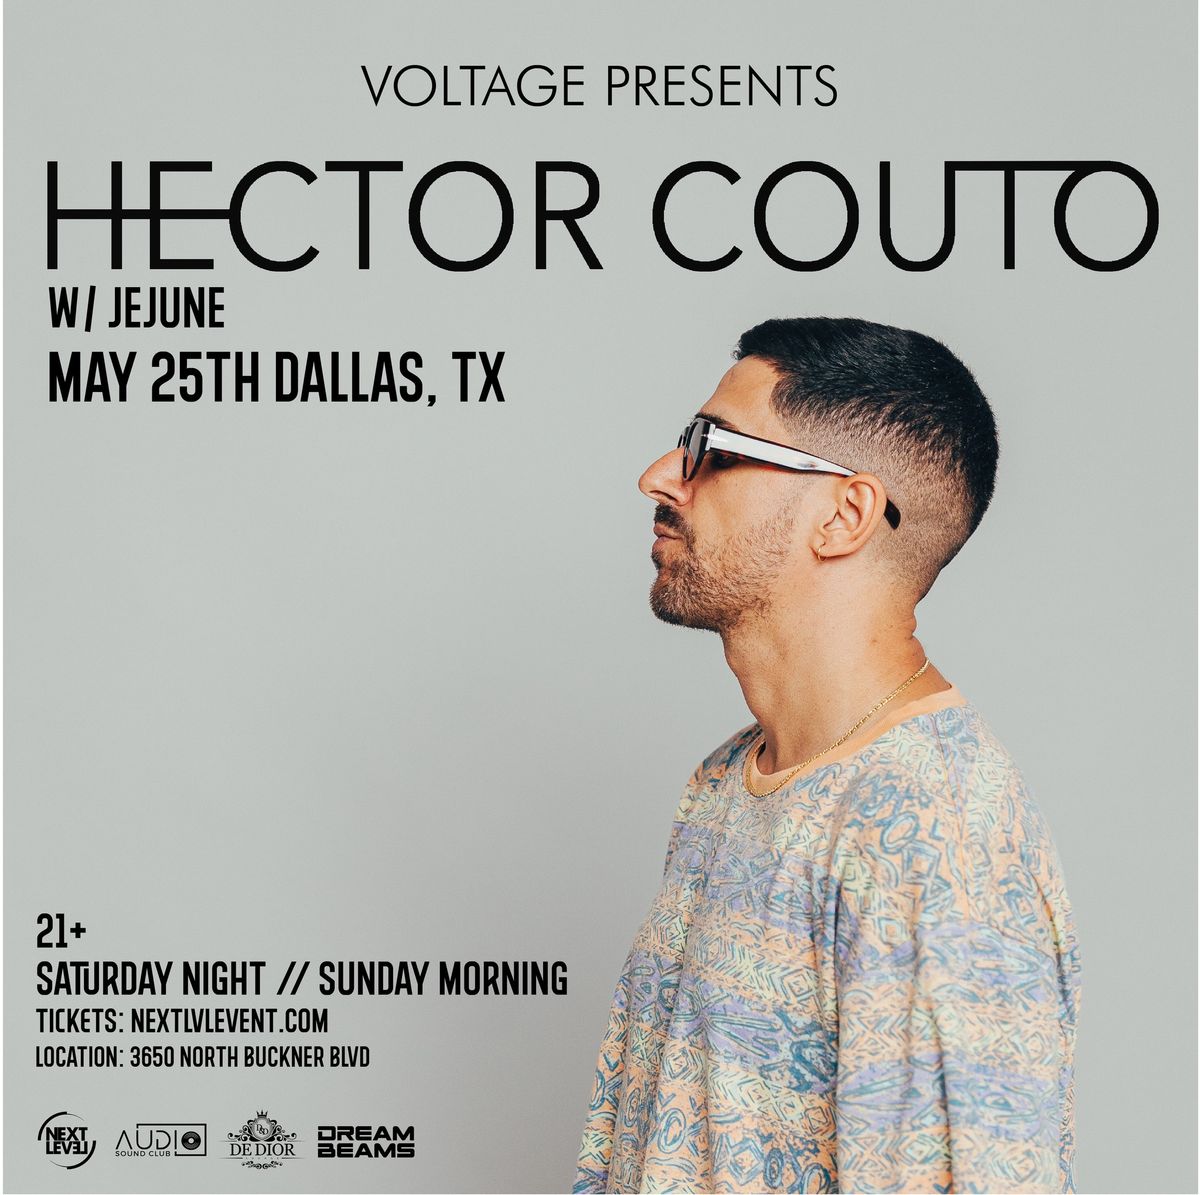 Hector Couto at Voltage After Hours 